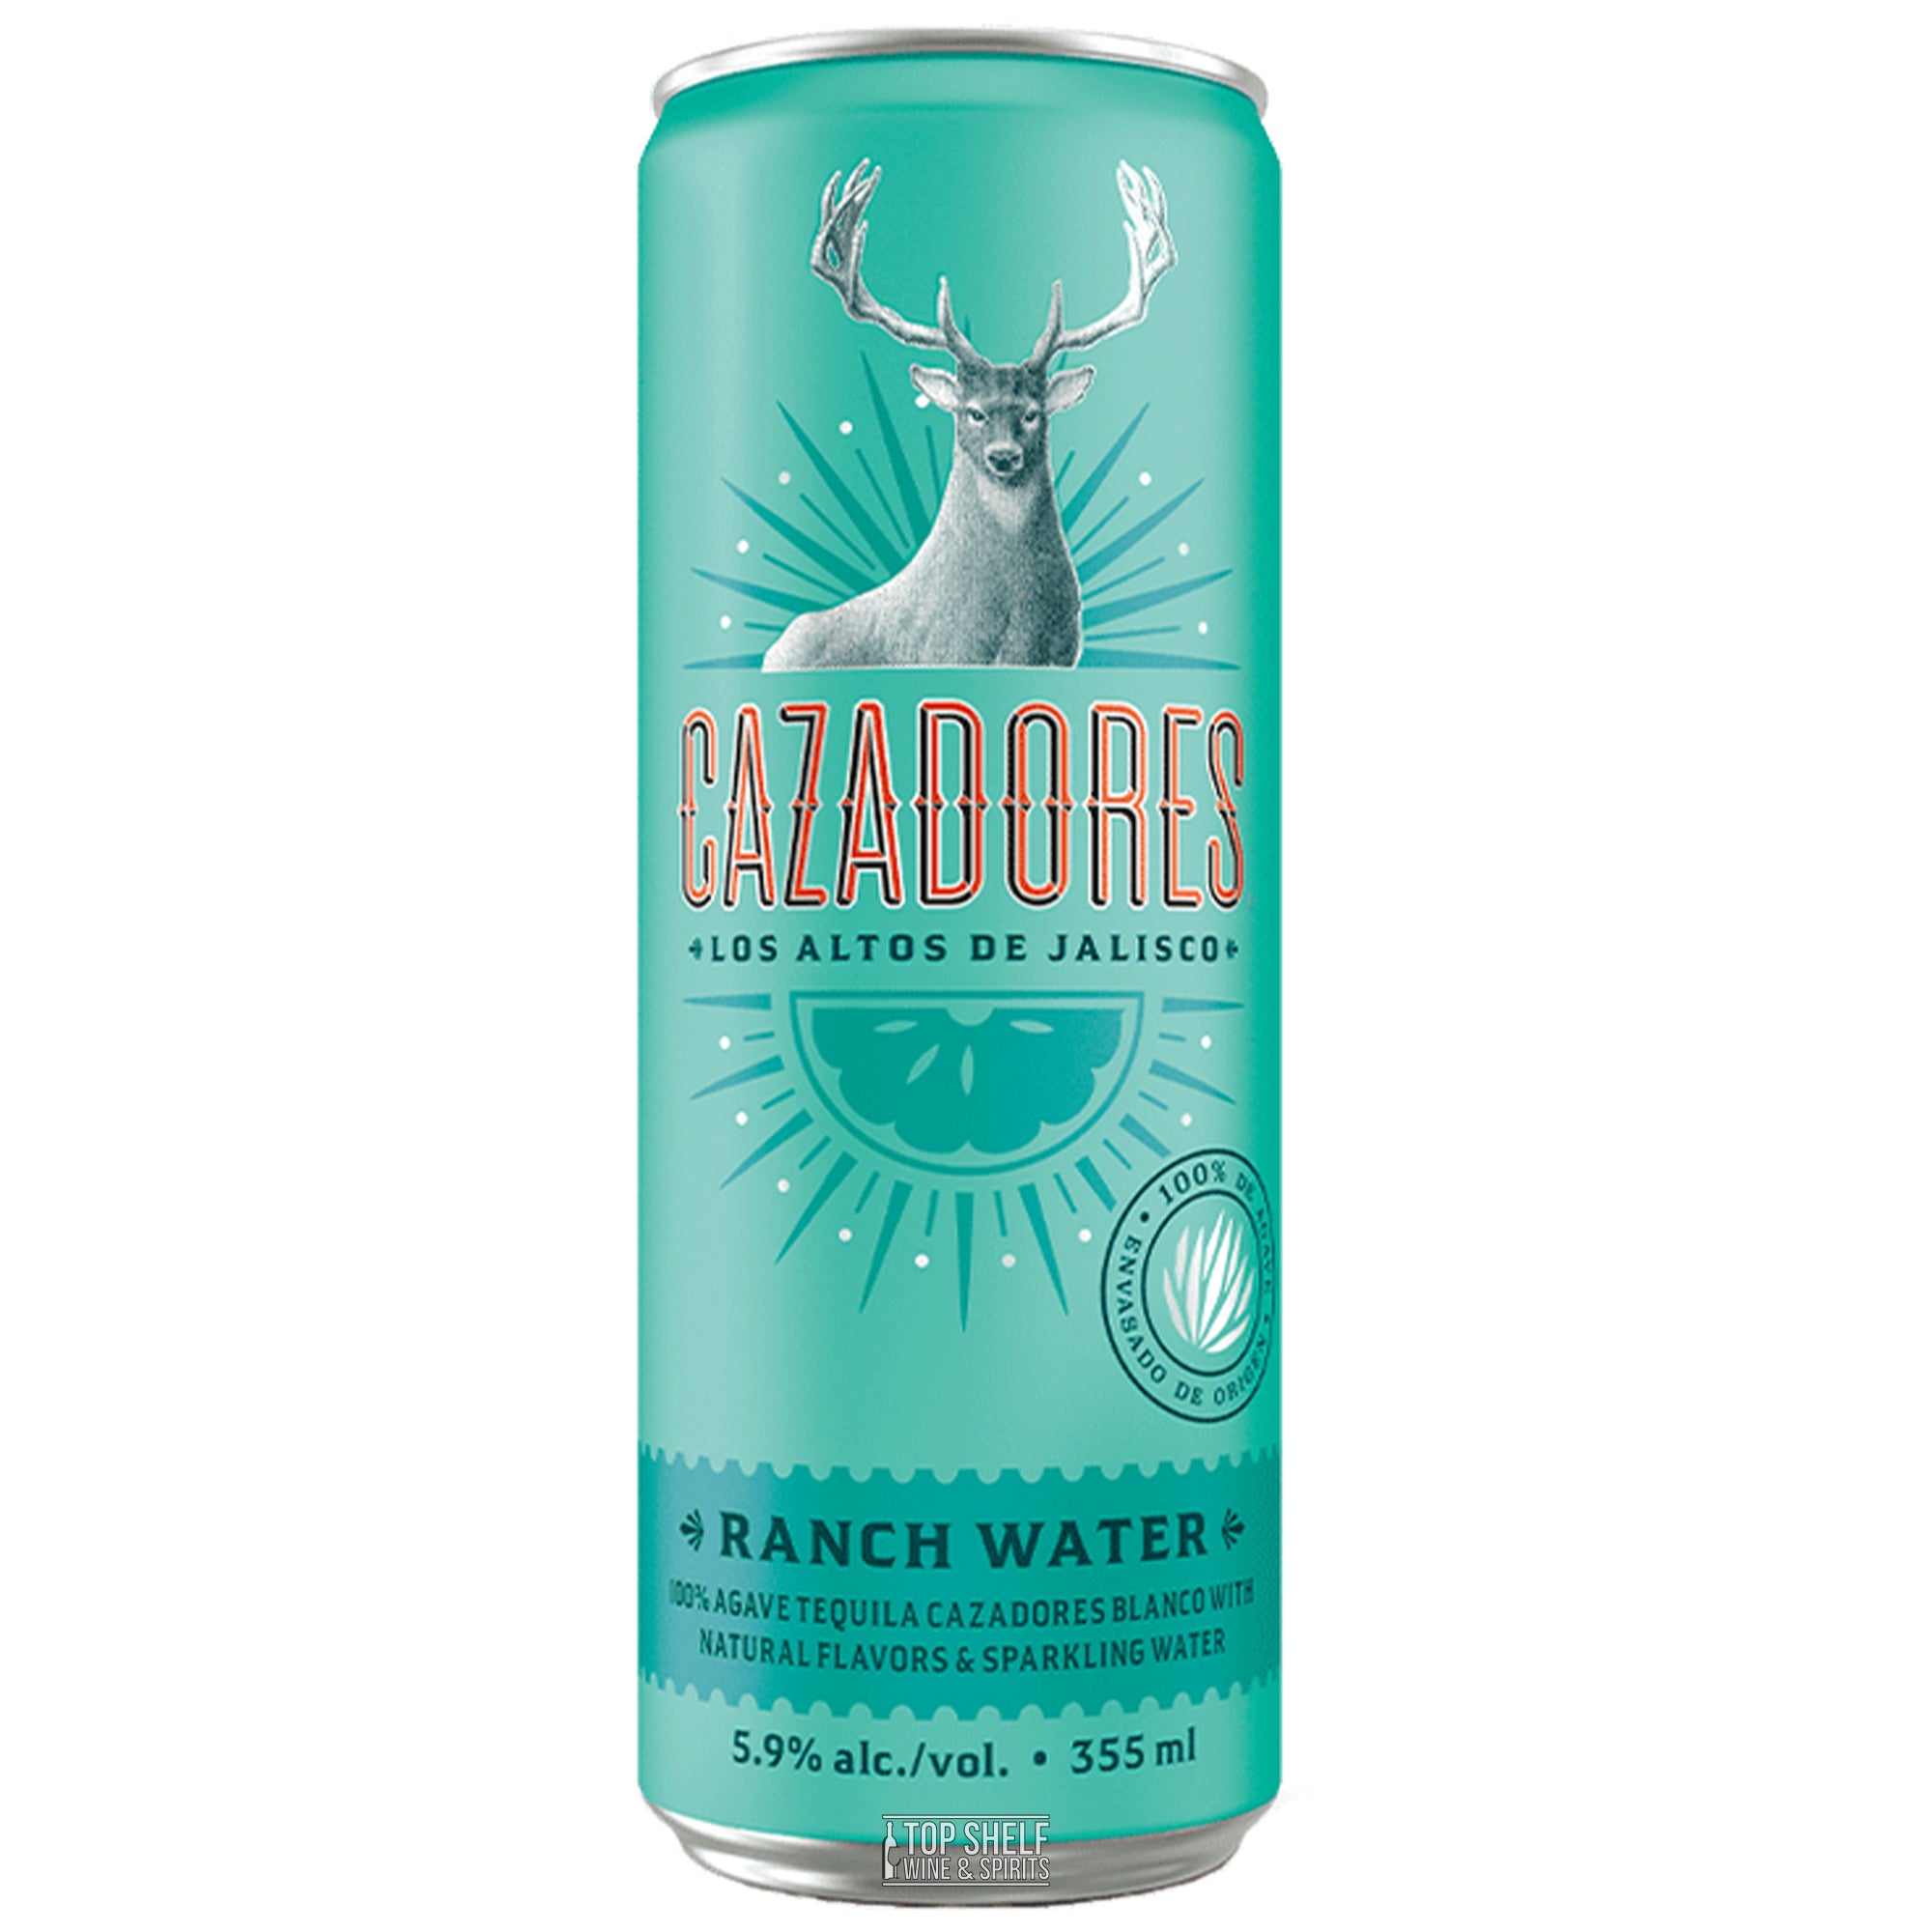 Cazadores Tequila Ranch Water Ready-To-Drink 4-Pack Cans